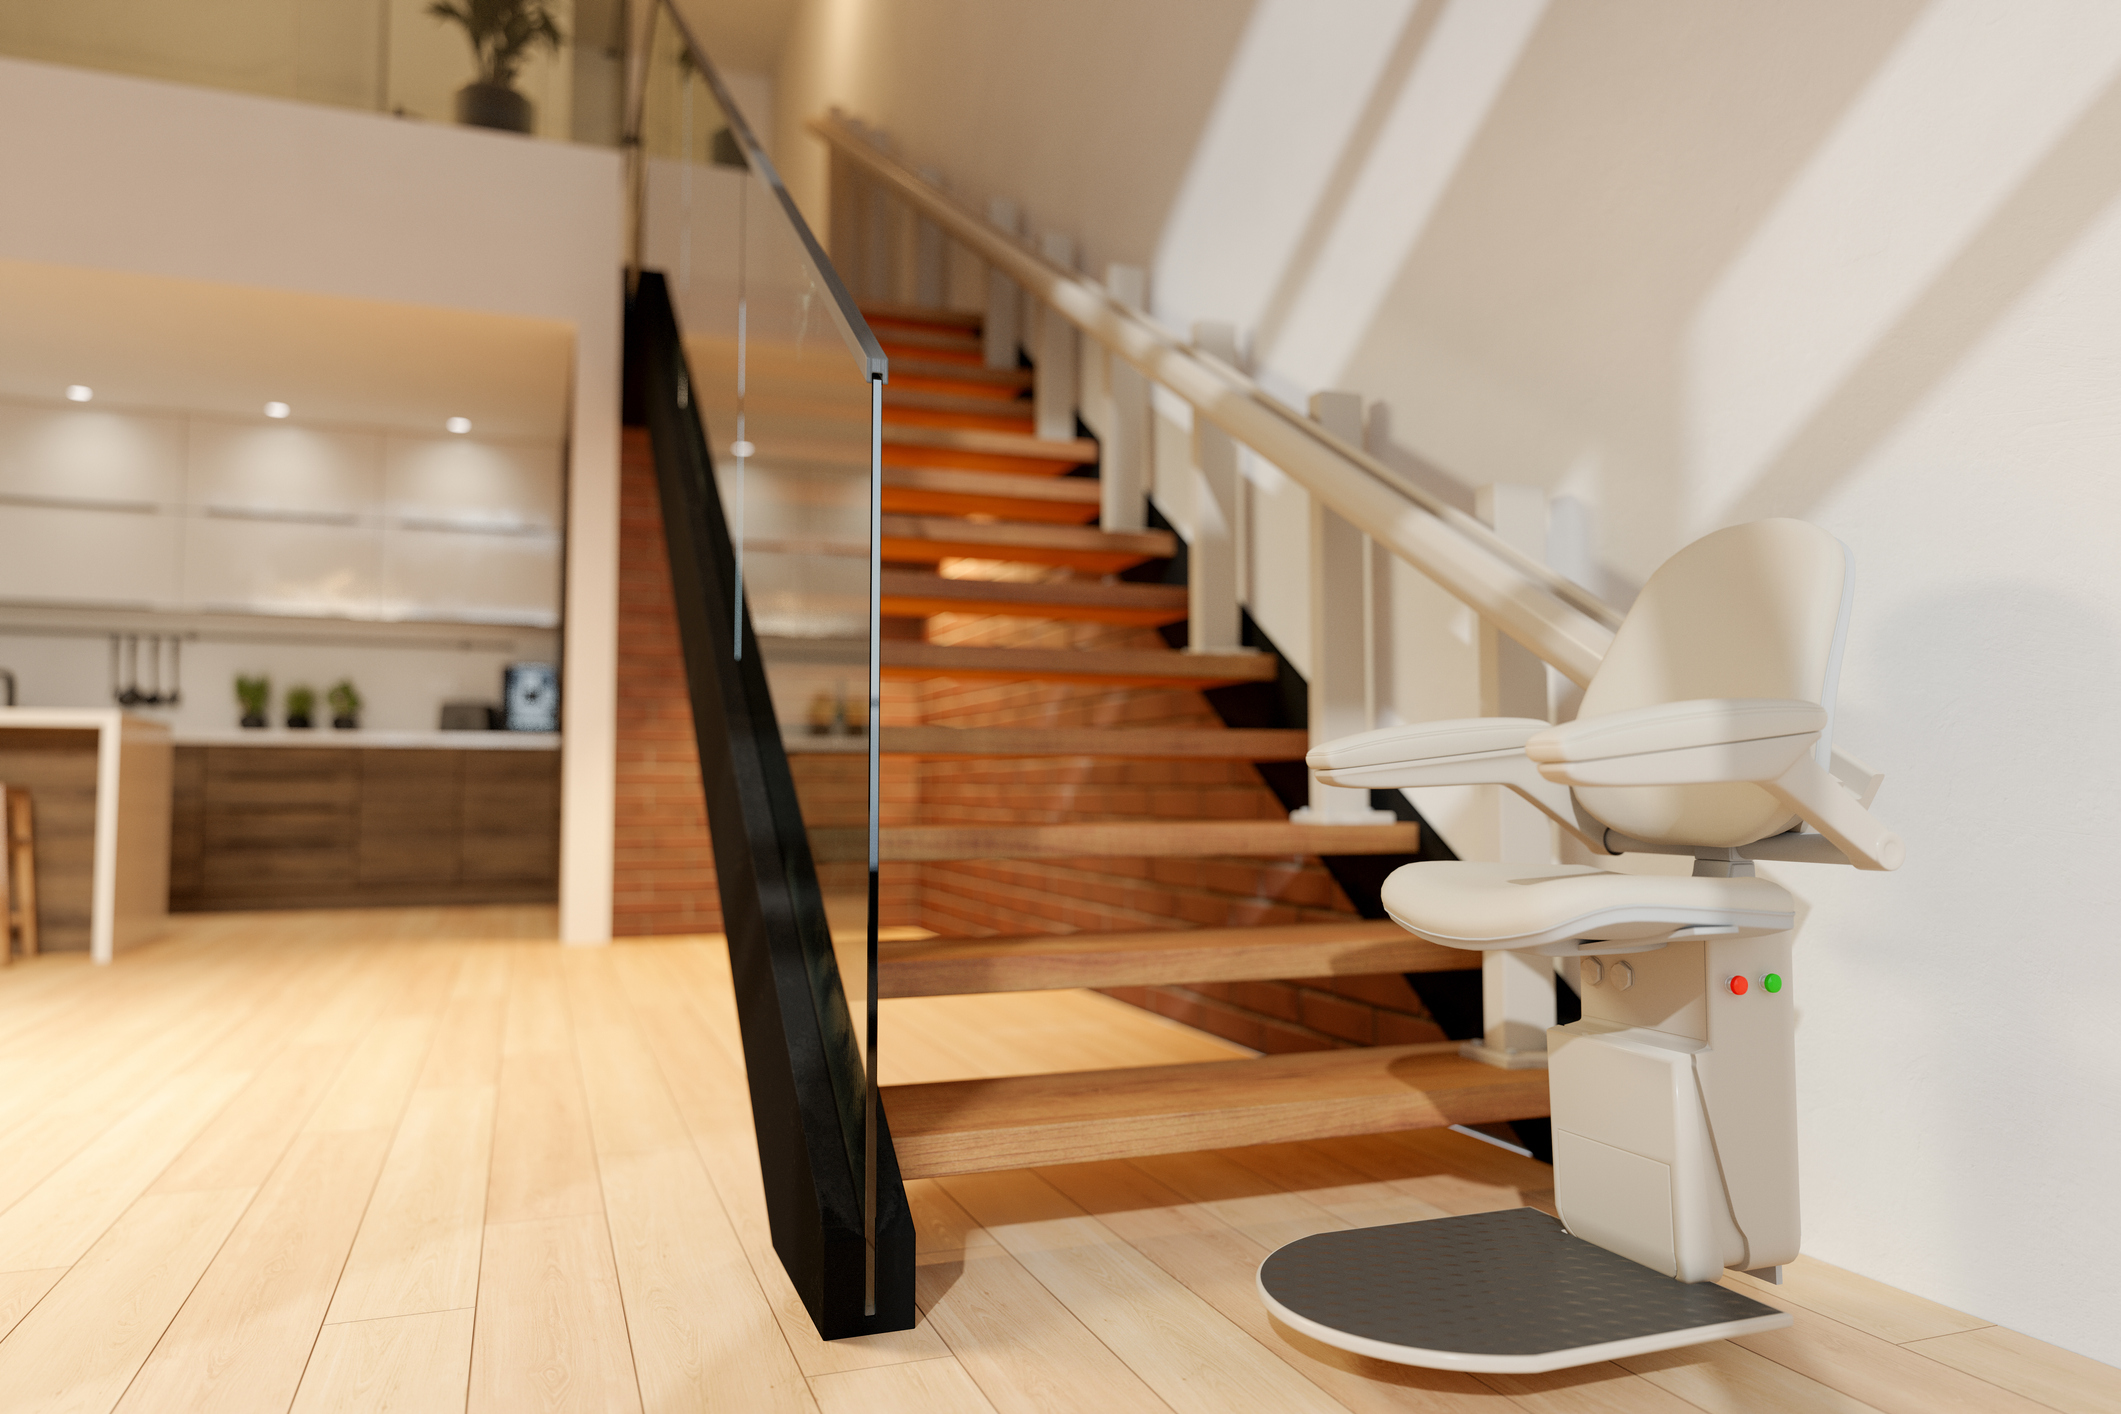 home chair-style used stair lift at bottom of staircase